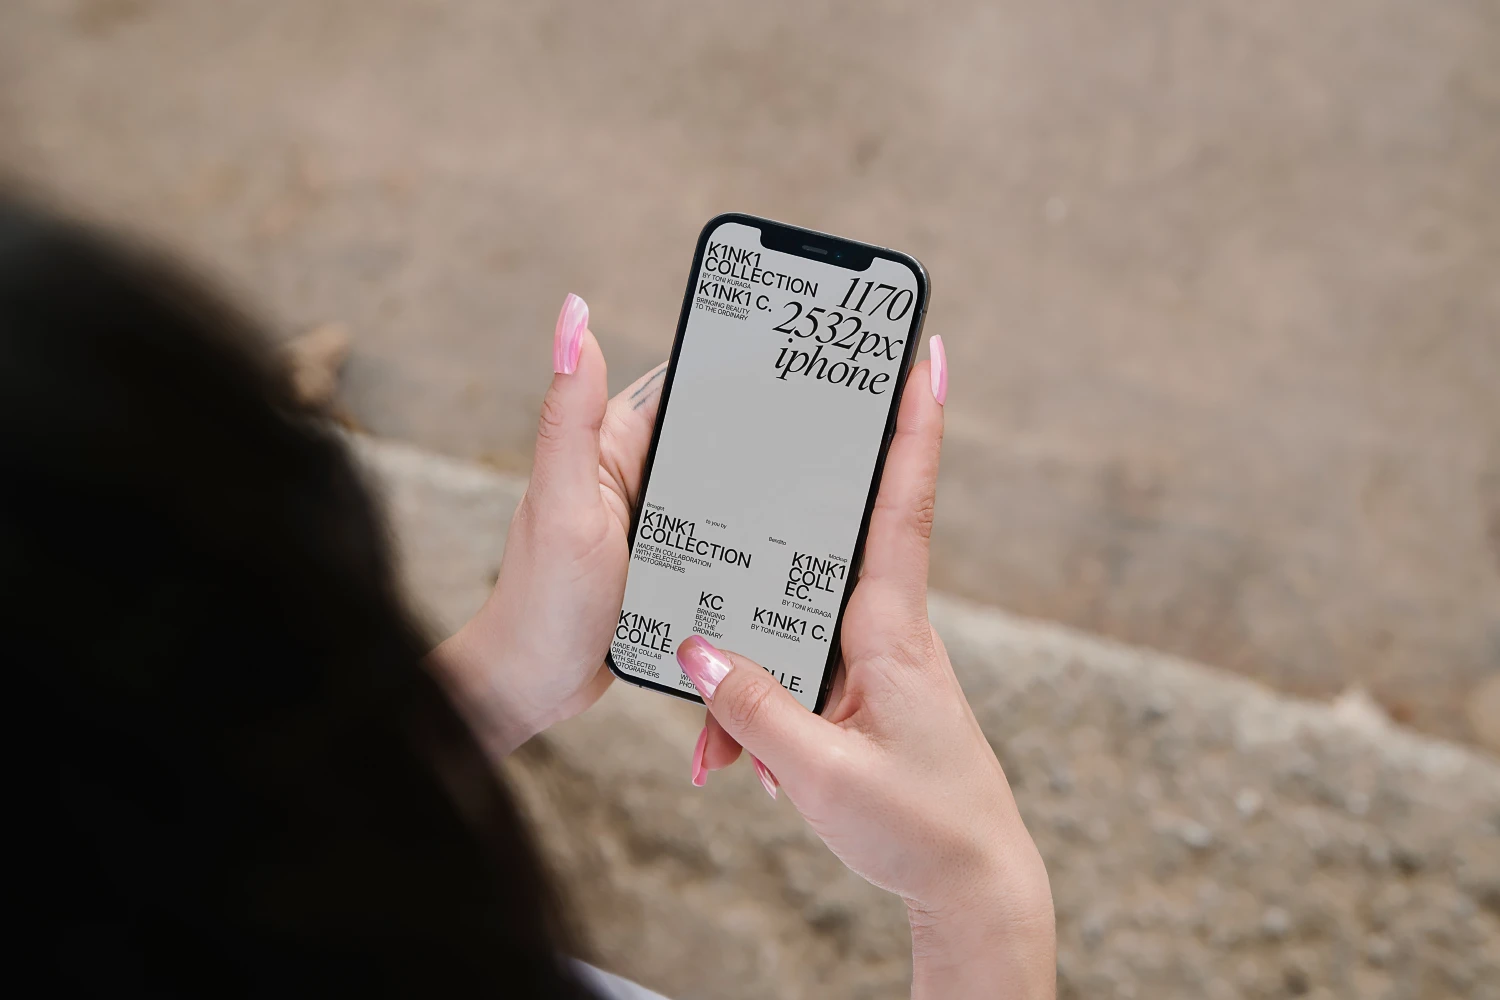 iPhone mockup in the hands of a girl with painted nails.